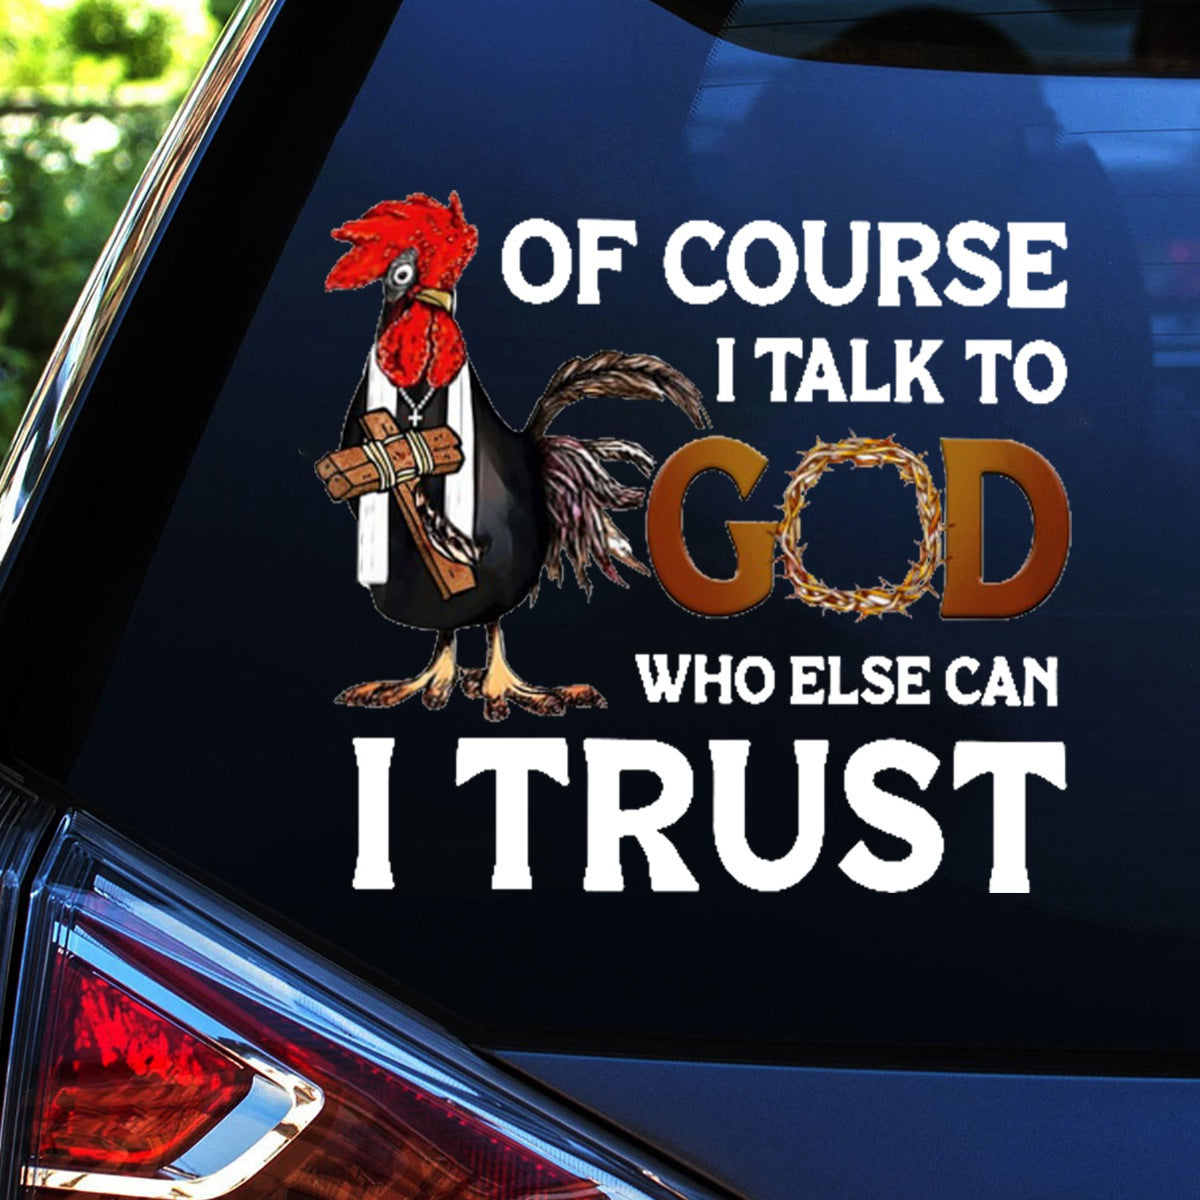 I Talk To God Who Can I Trust Stick/Decal